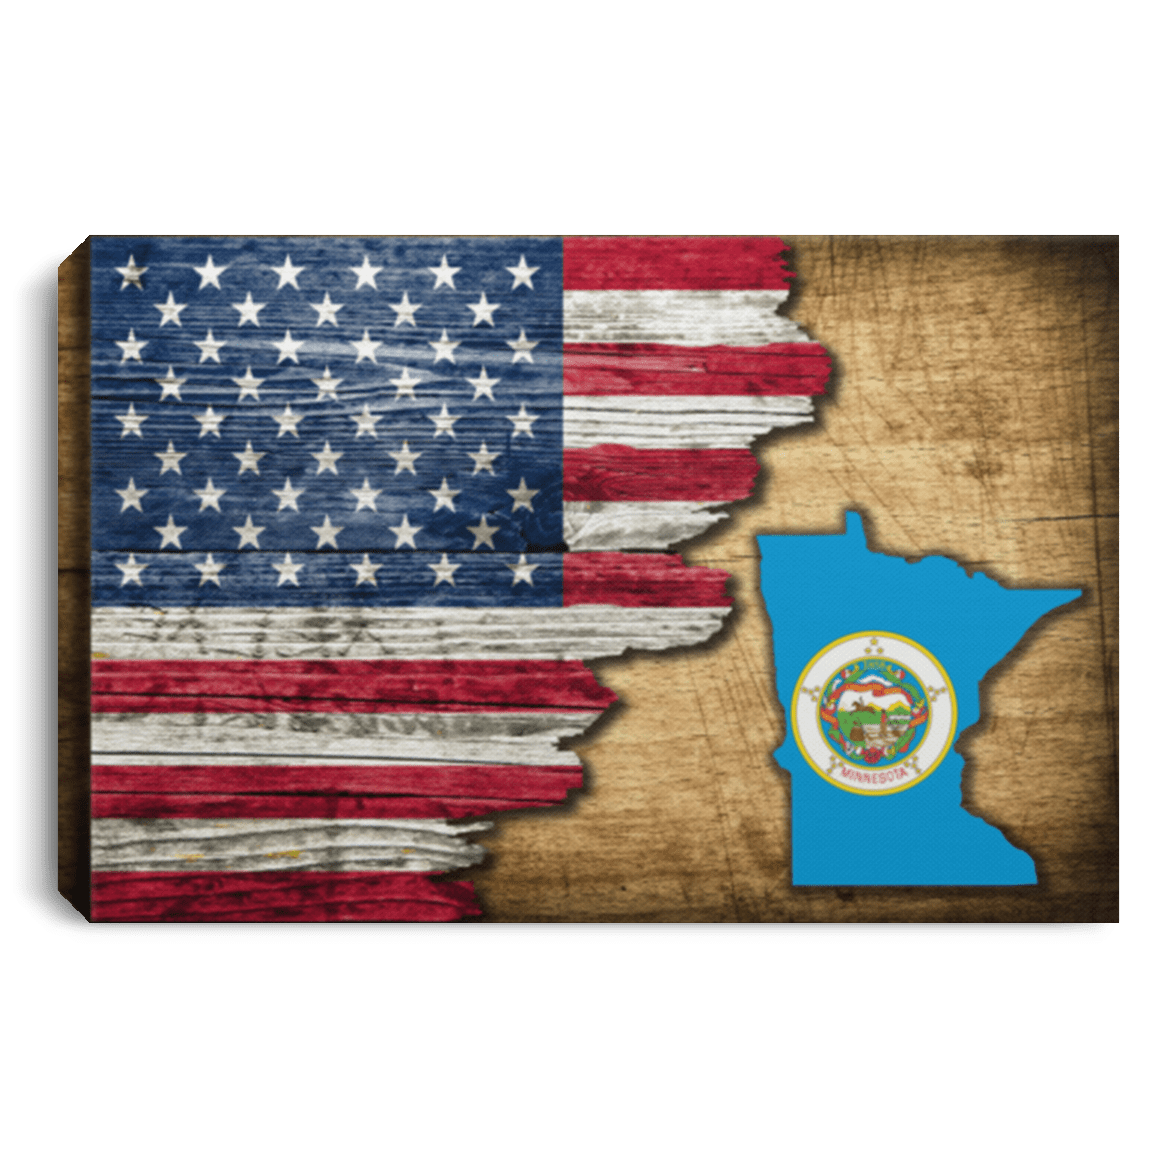 United States/Minnesota Flag Ripped Effect 12X8 Inches Landscape Canvas .75In Frame